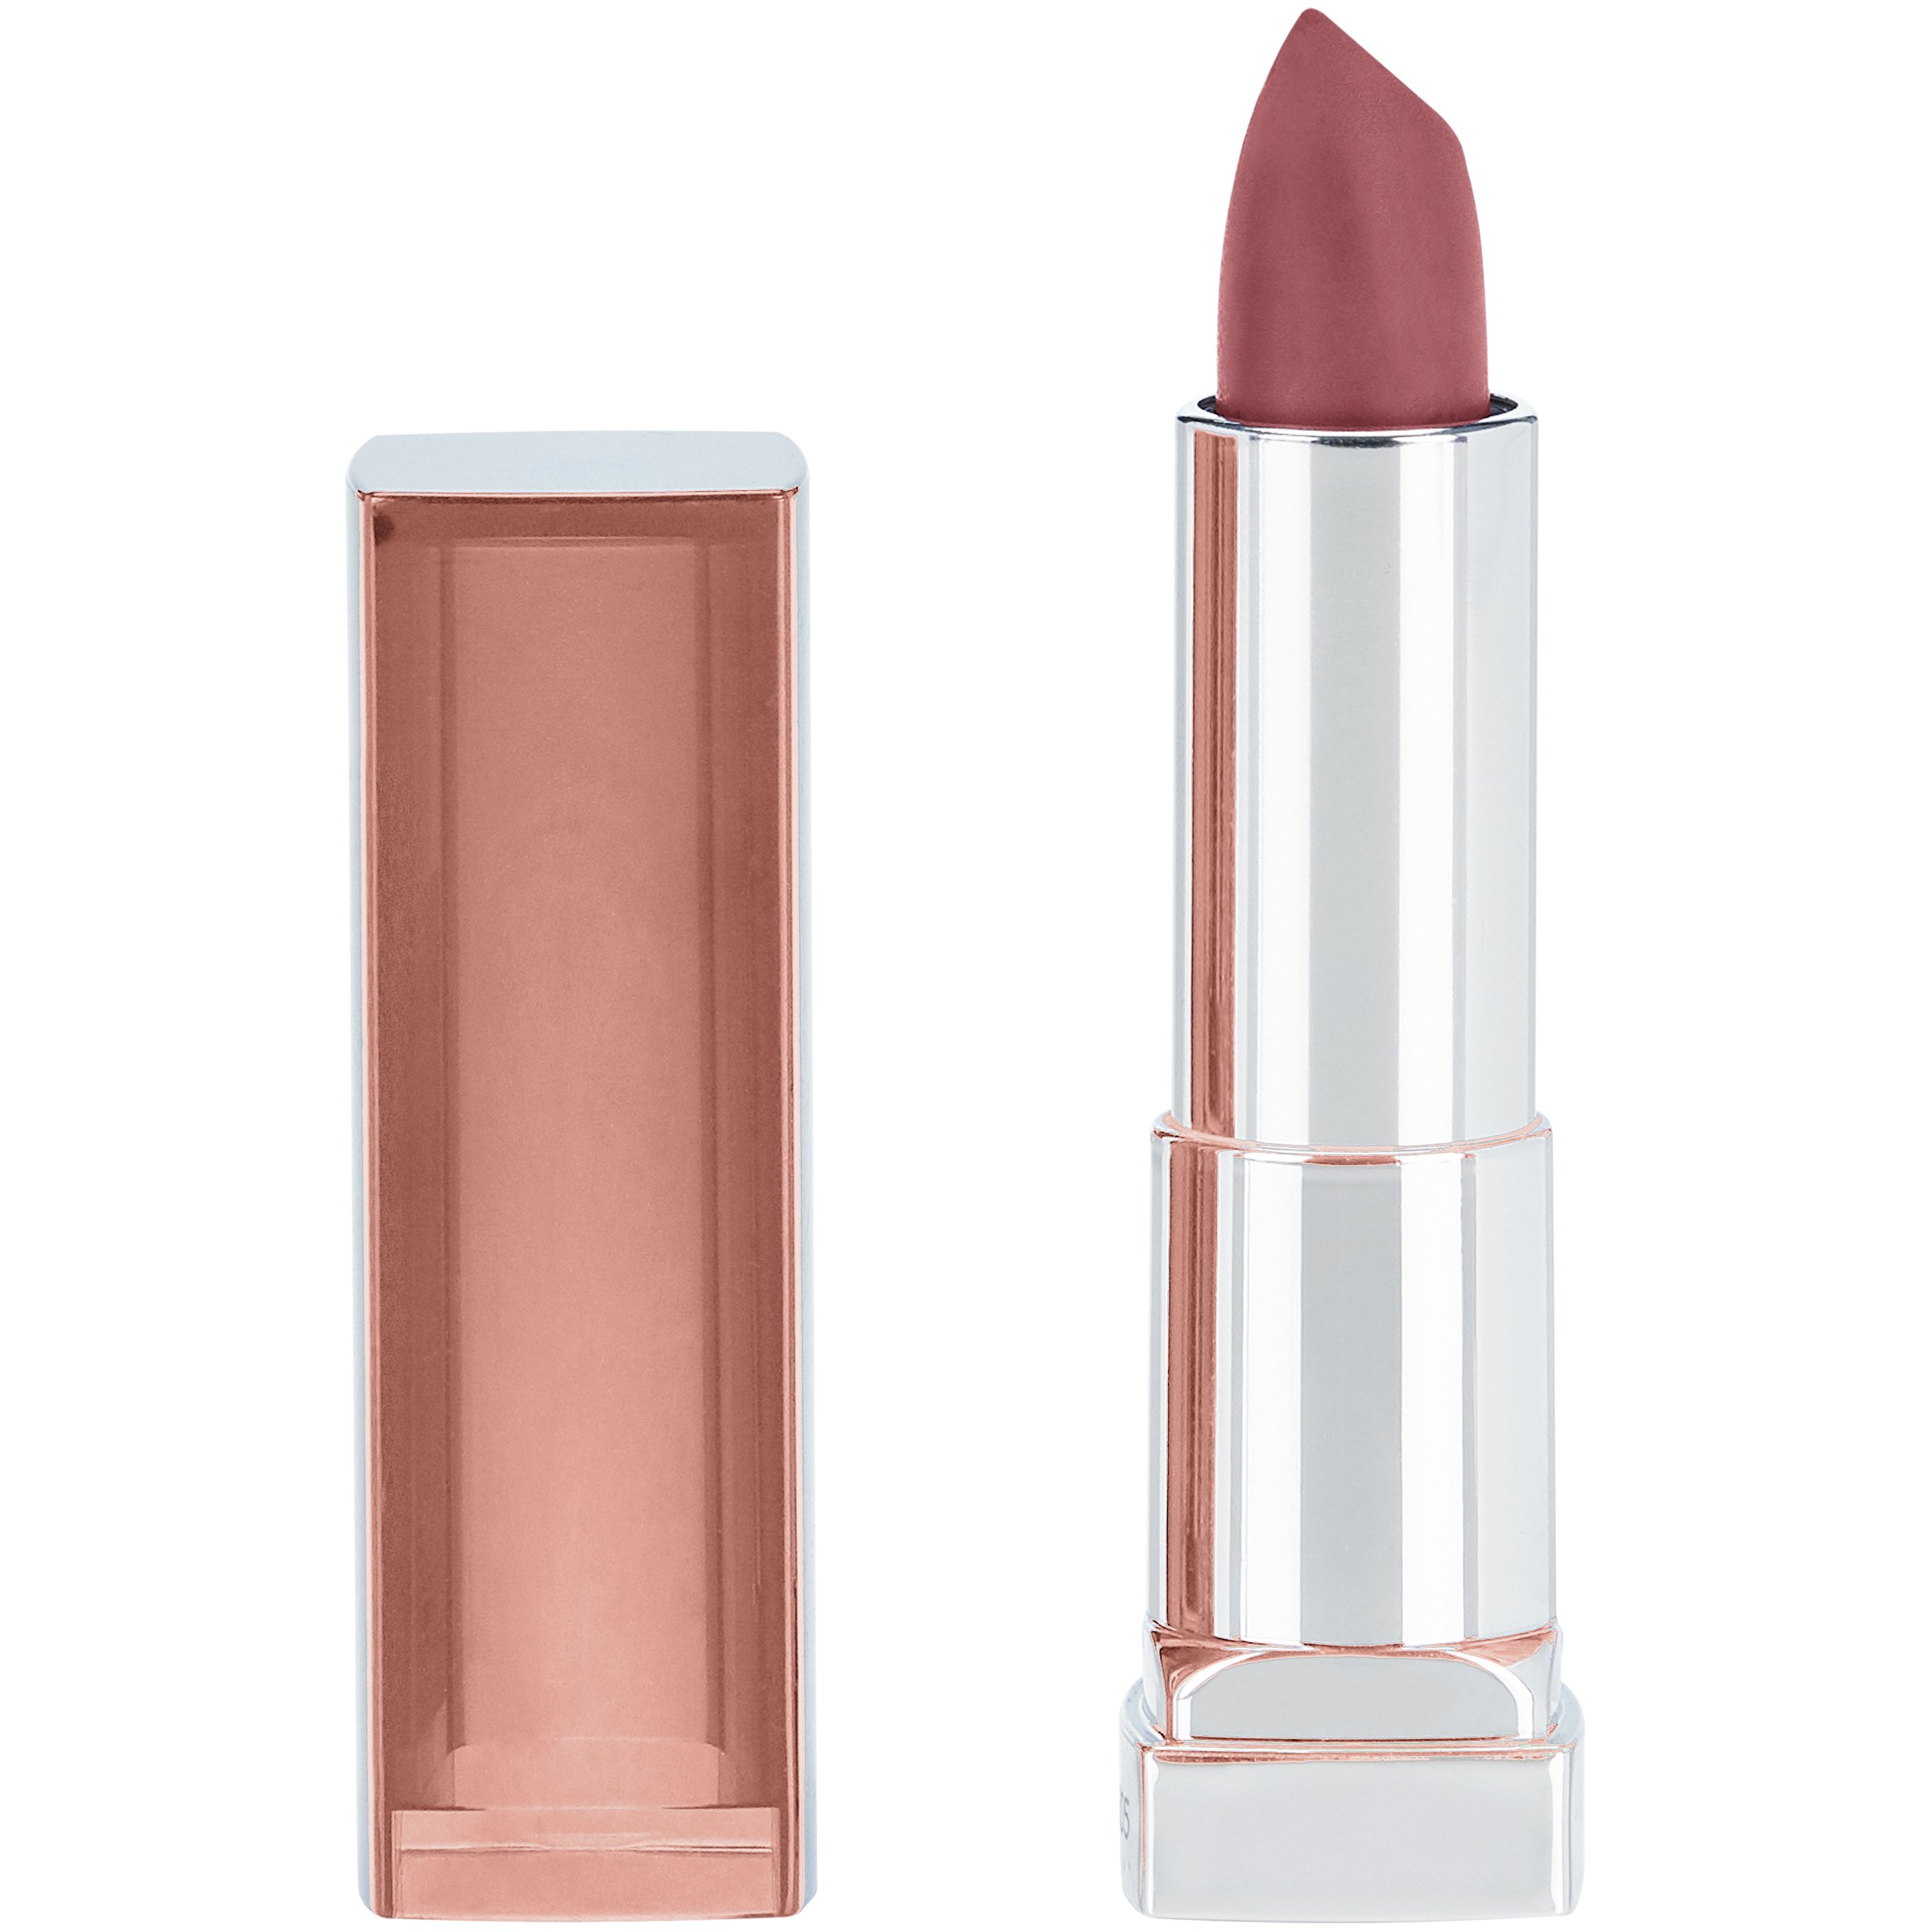 Maybelline Color Sensational Inti Matte Nudes Lipstick Naked Coral Shop Lips At H E B 0324